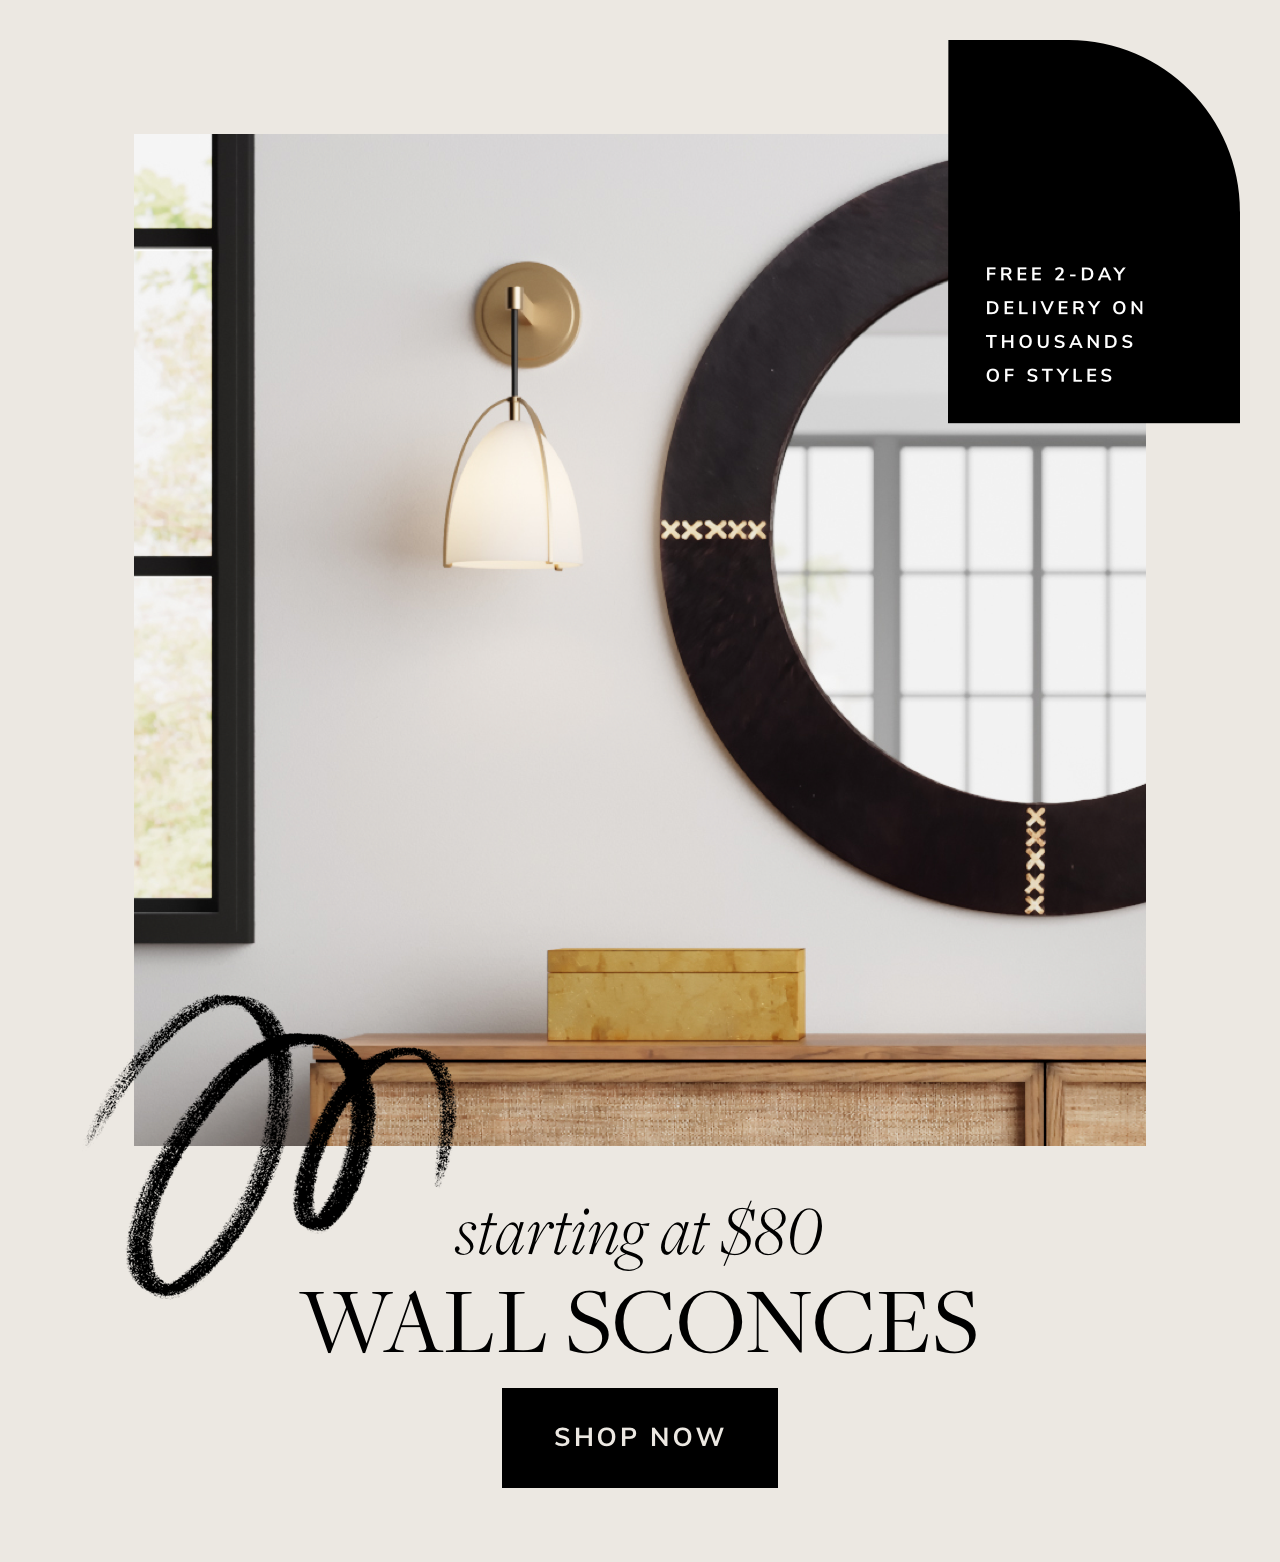  starting at $80 WALL SCONCES SHOP NOW FREE 2-DAY DELIVERY ON THOUSANDS OF STYLES 